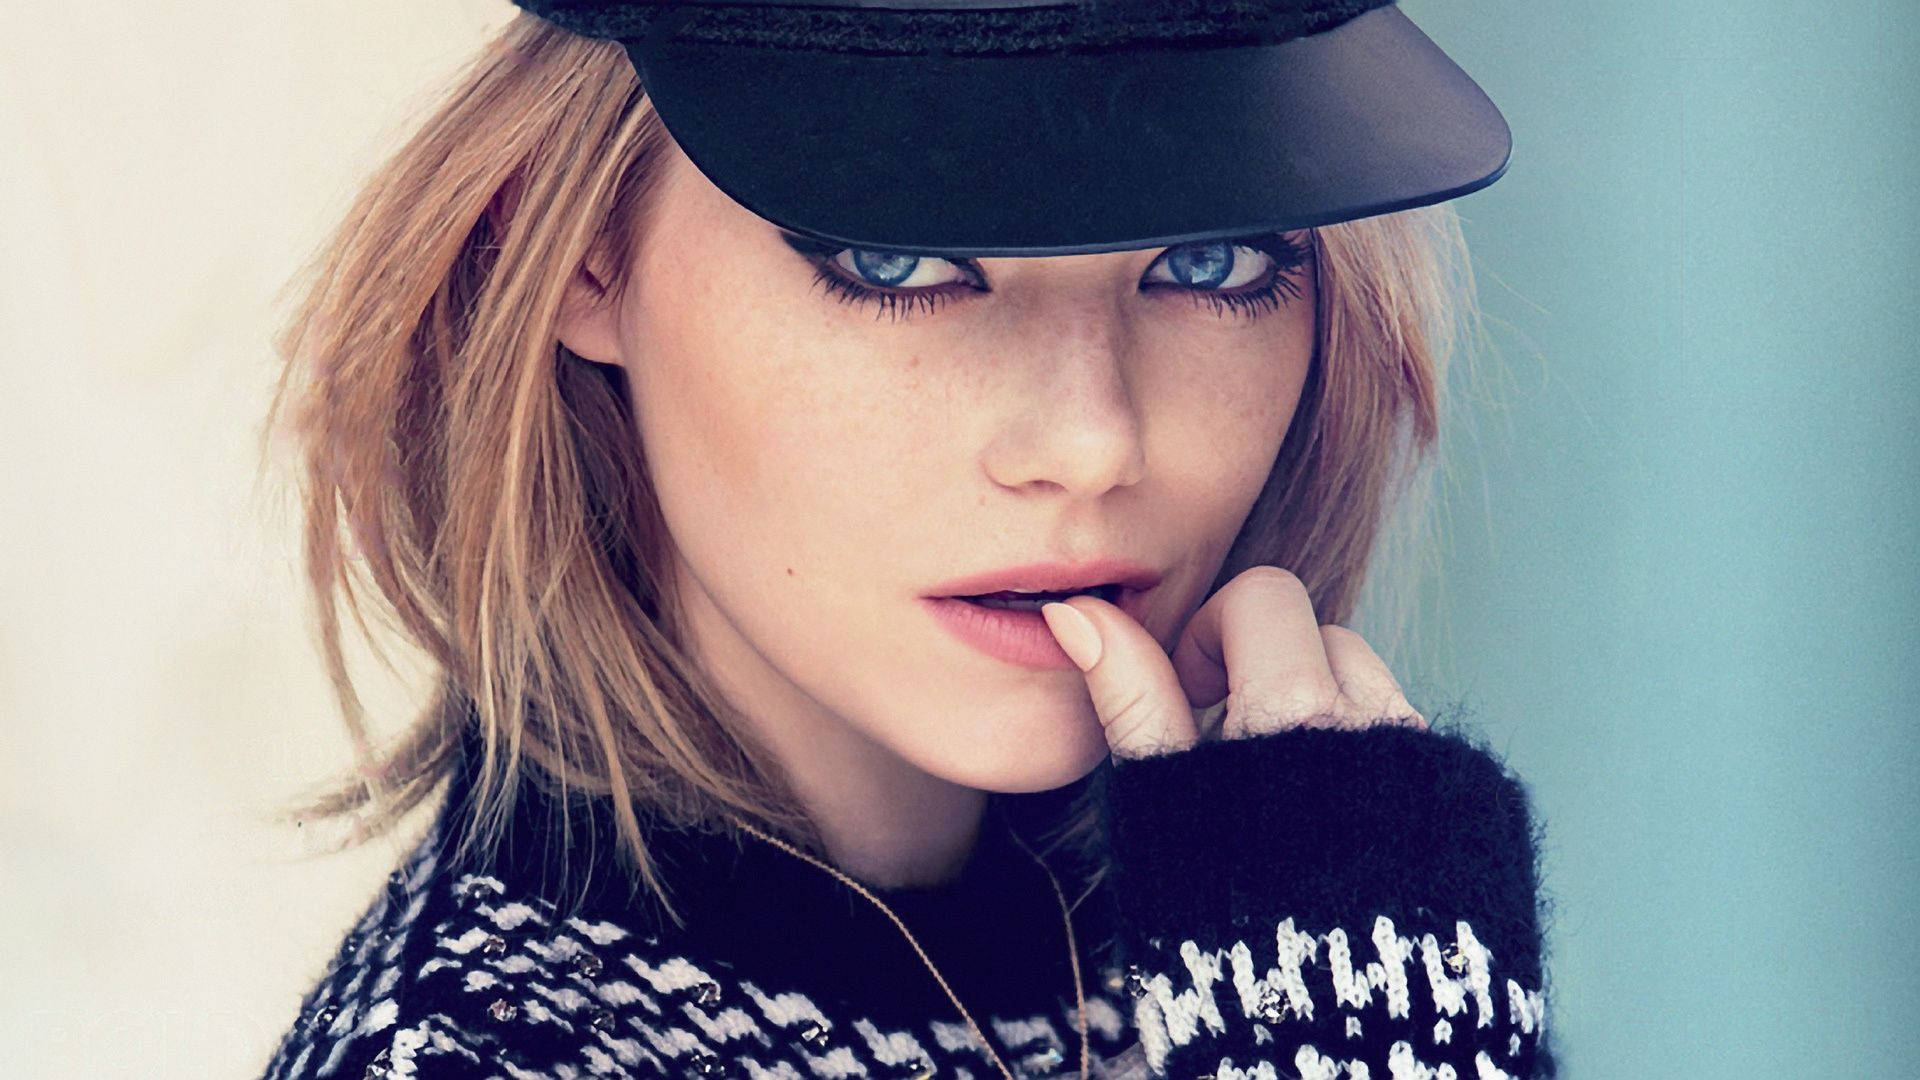 Emma Stone Looking Stylish In A Black Cap Background